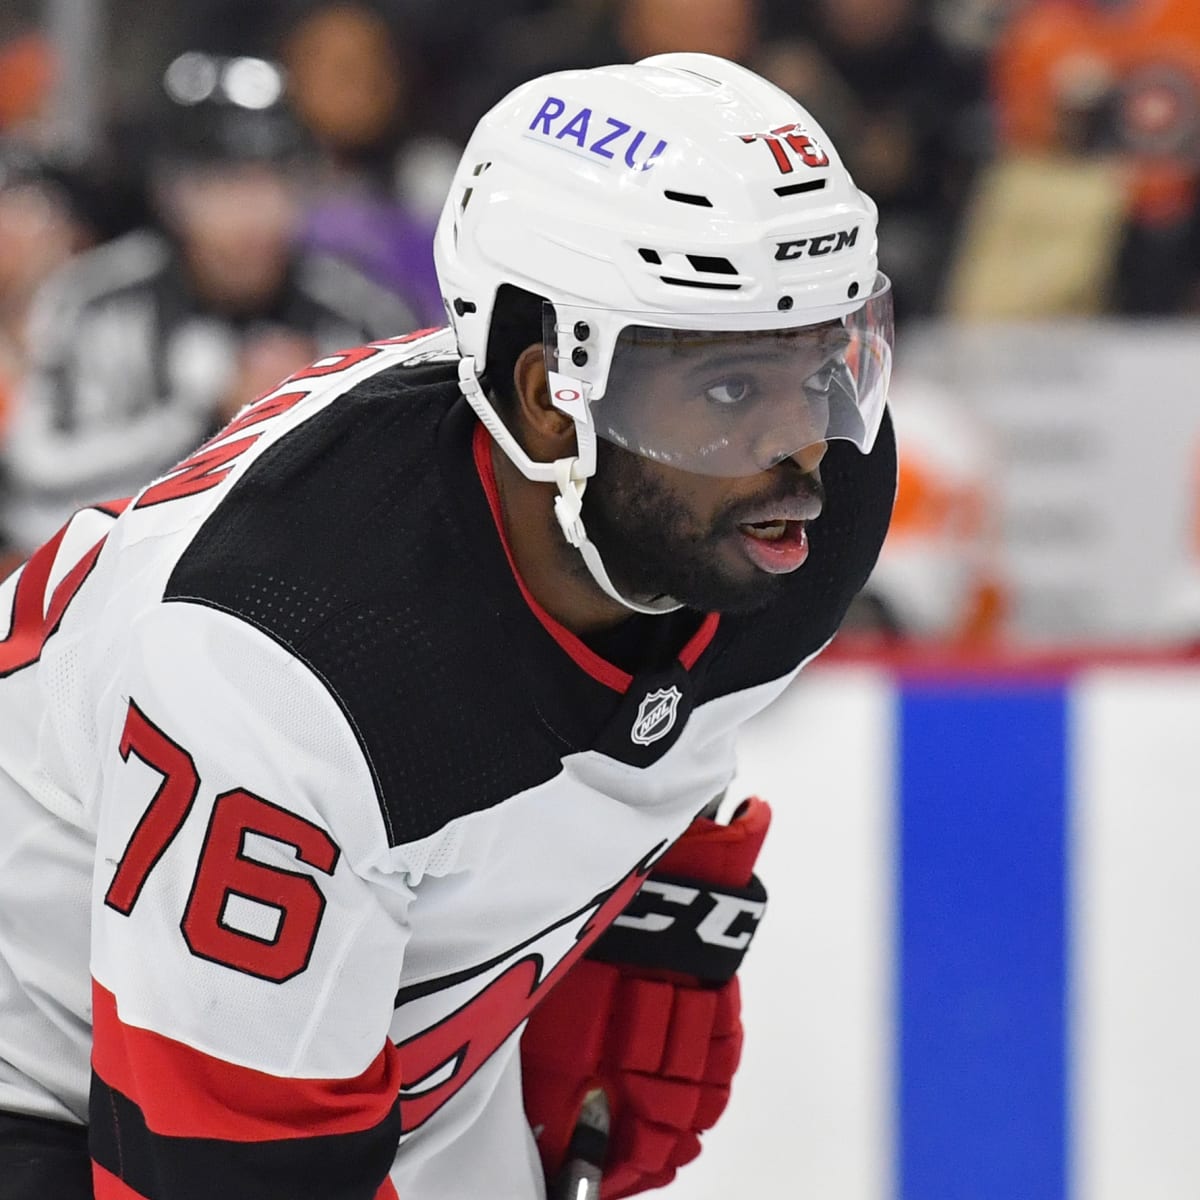 Wrong to push players into being activists, says Subban